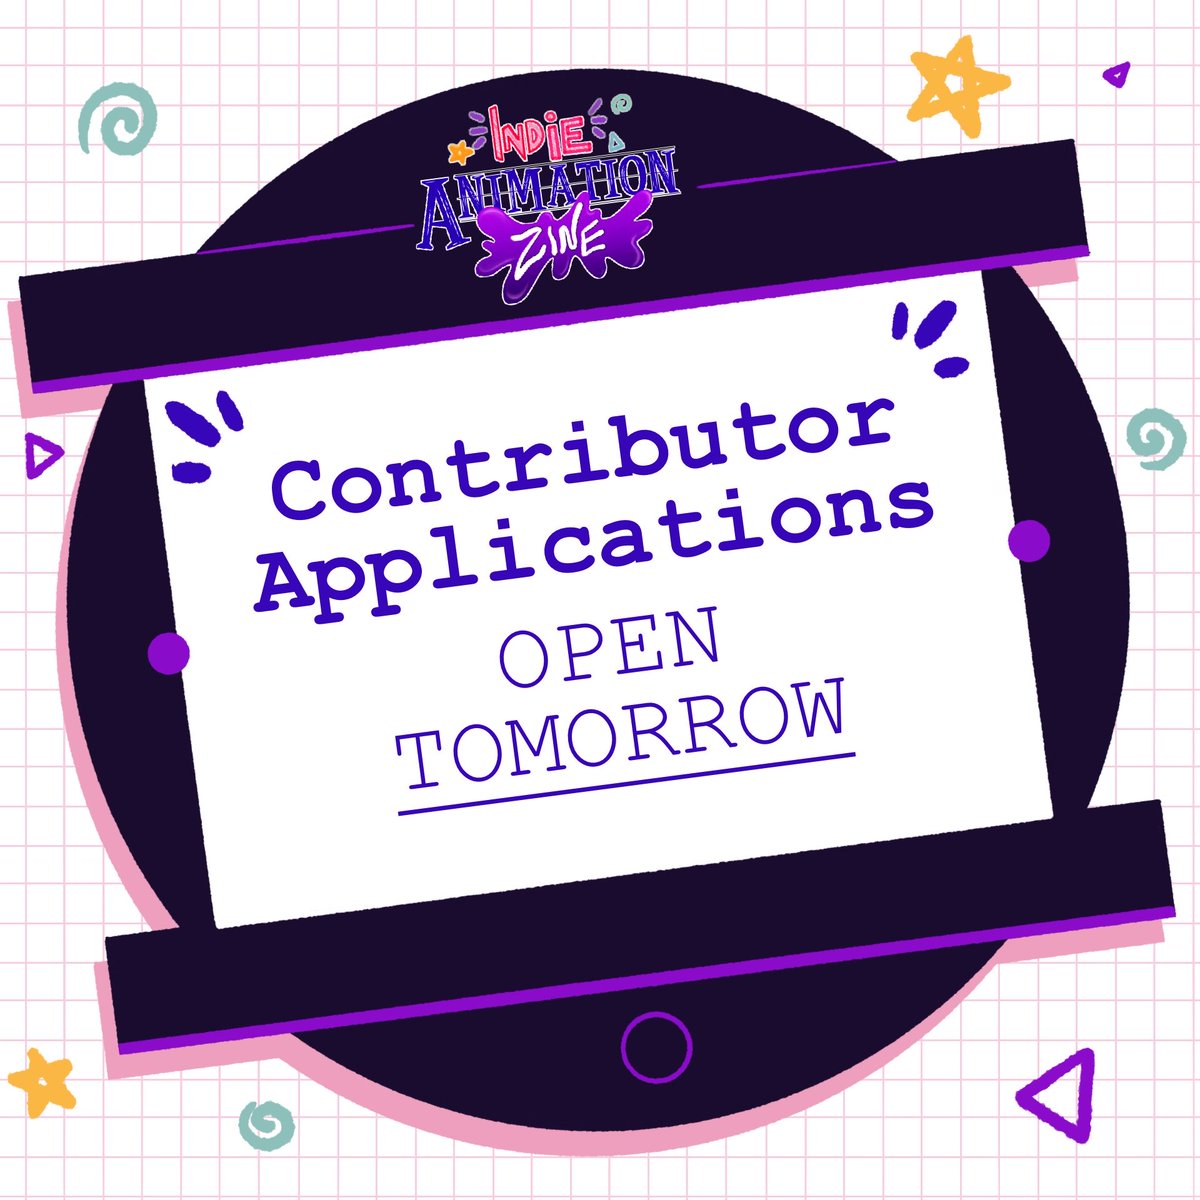 I know you’ve all been anxiously awaiting the day contributor applications open. Well, guess what? That’s tomorrow!